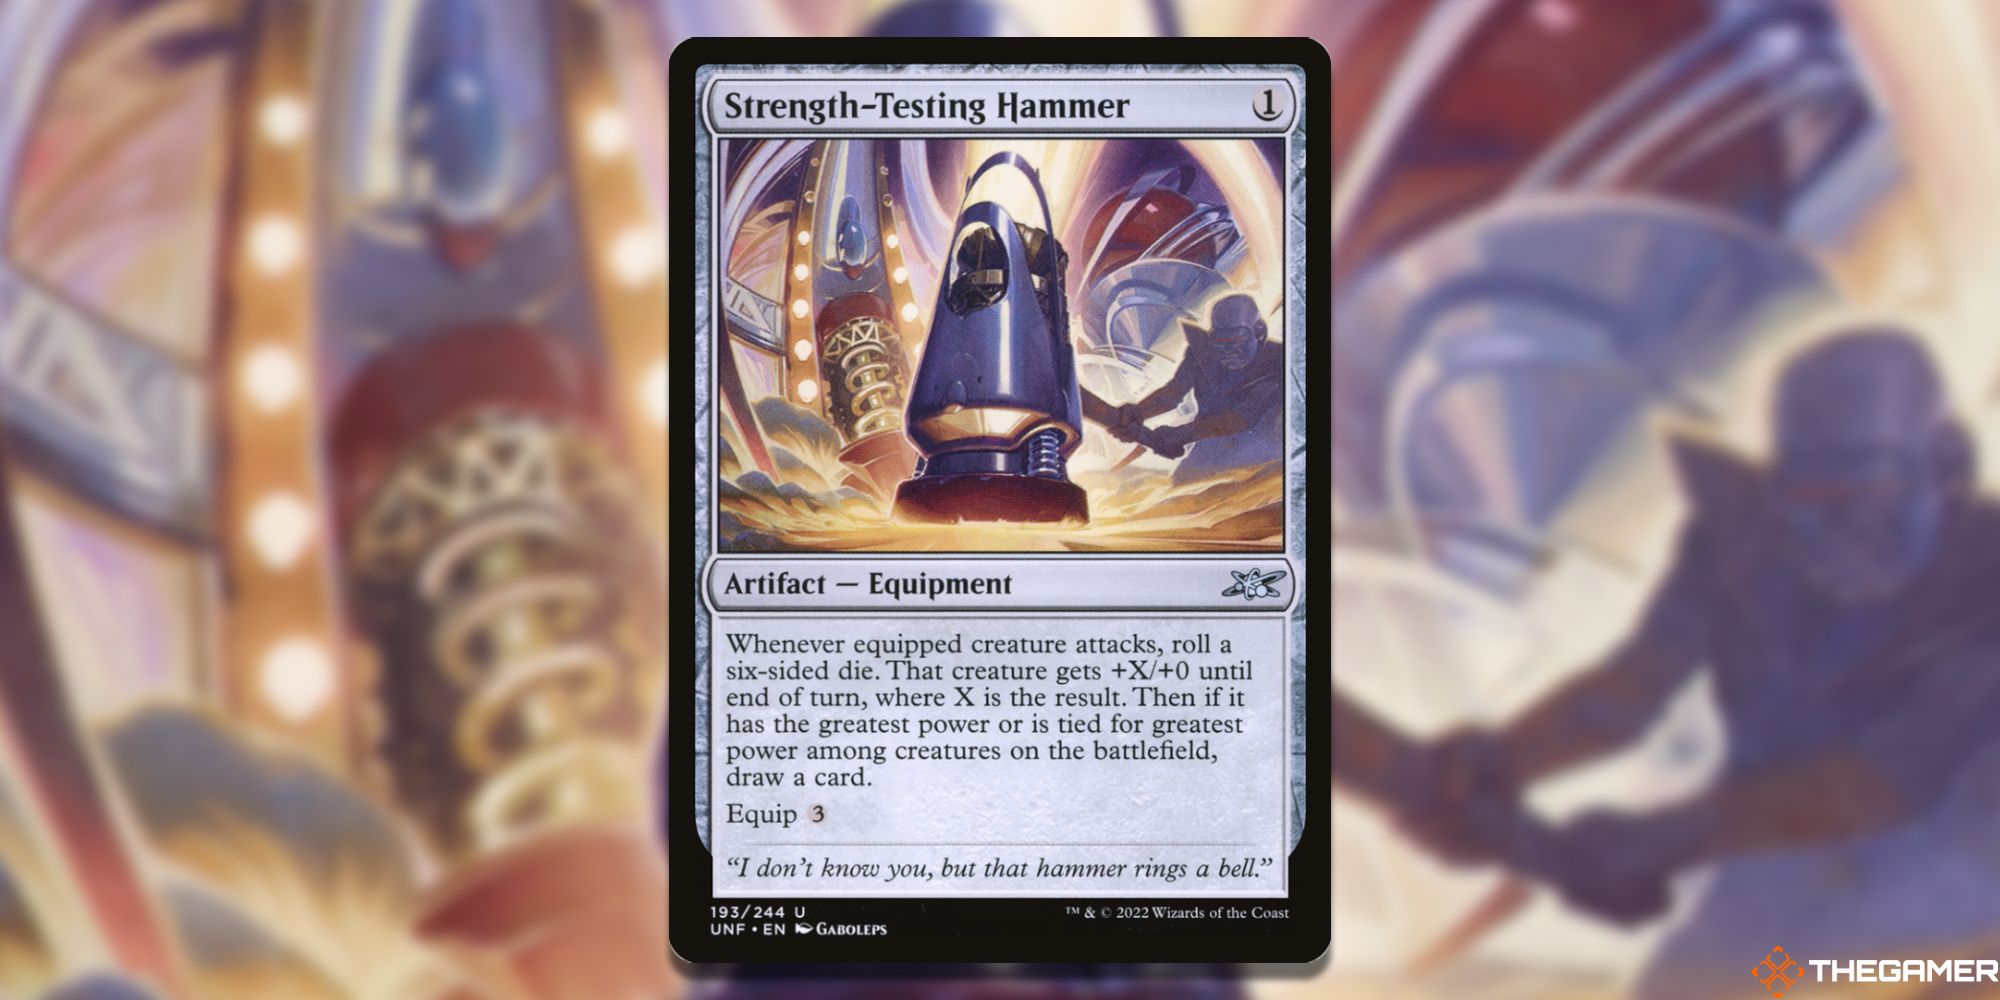 Image of the Strength Testing Hammer card in Magic: The Gathering, with art by Gaboleps